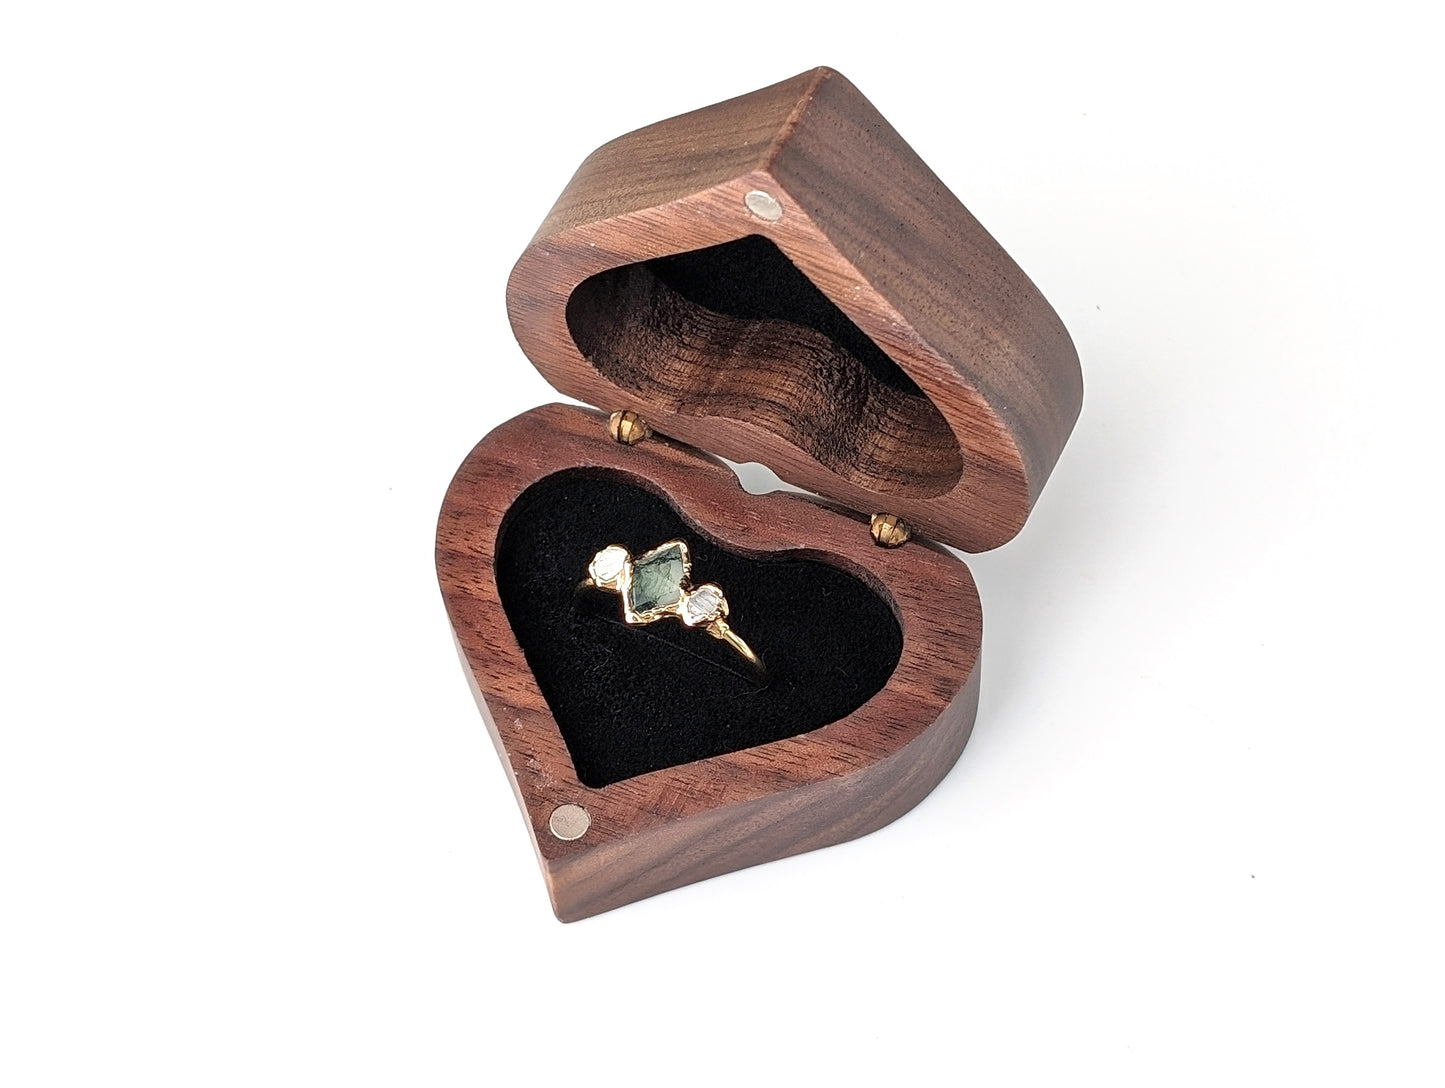 ADD-ON - Heart shape wooden ring gift box